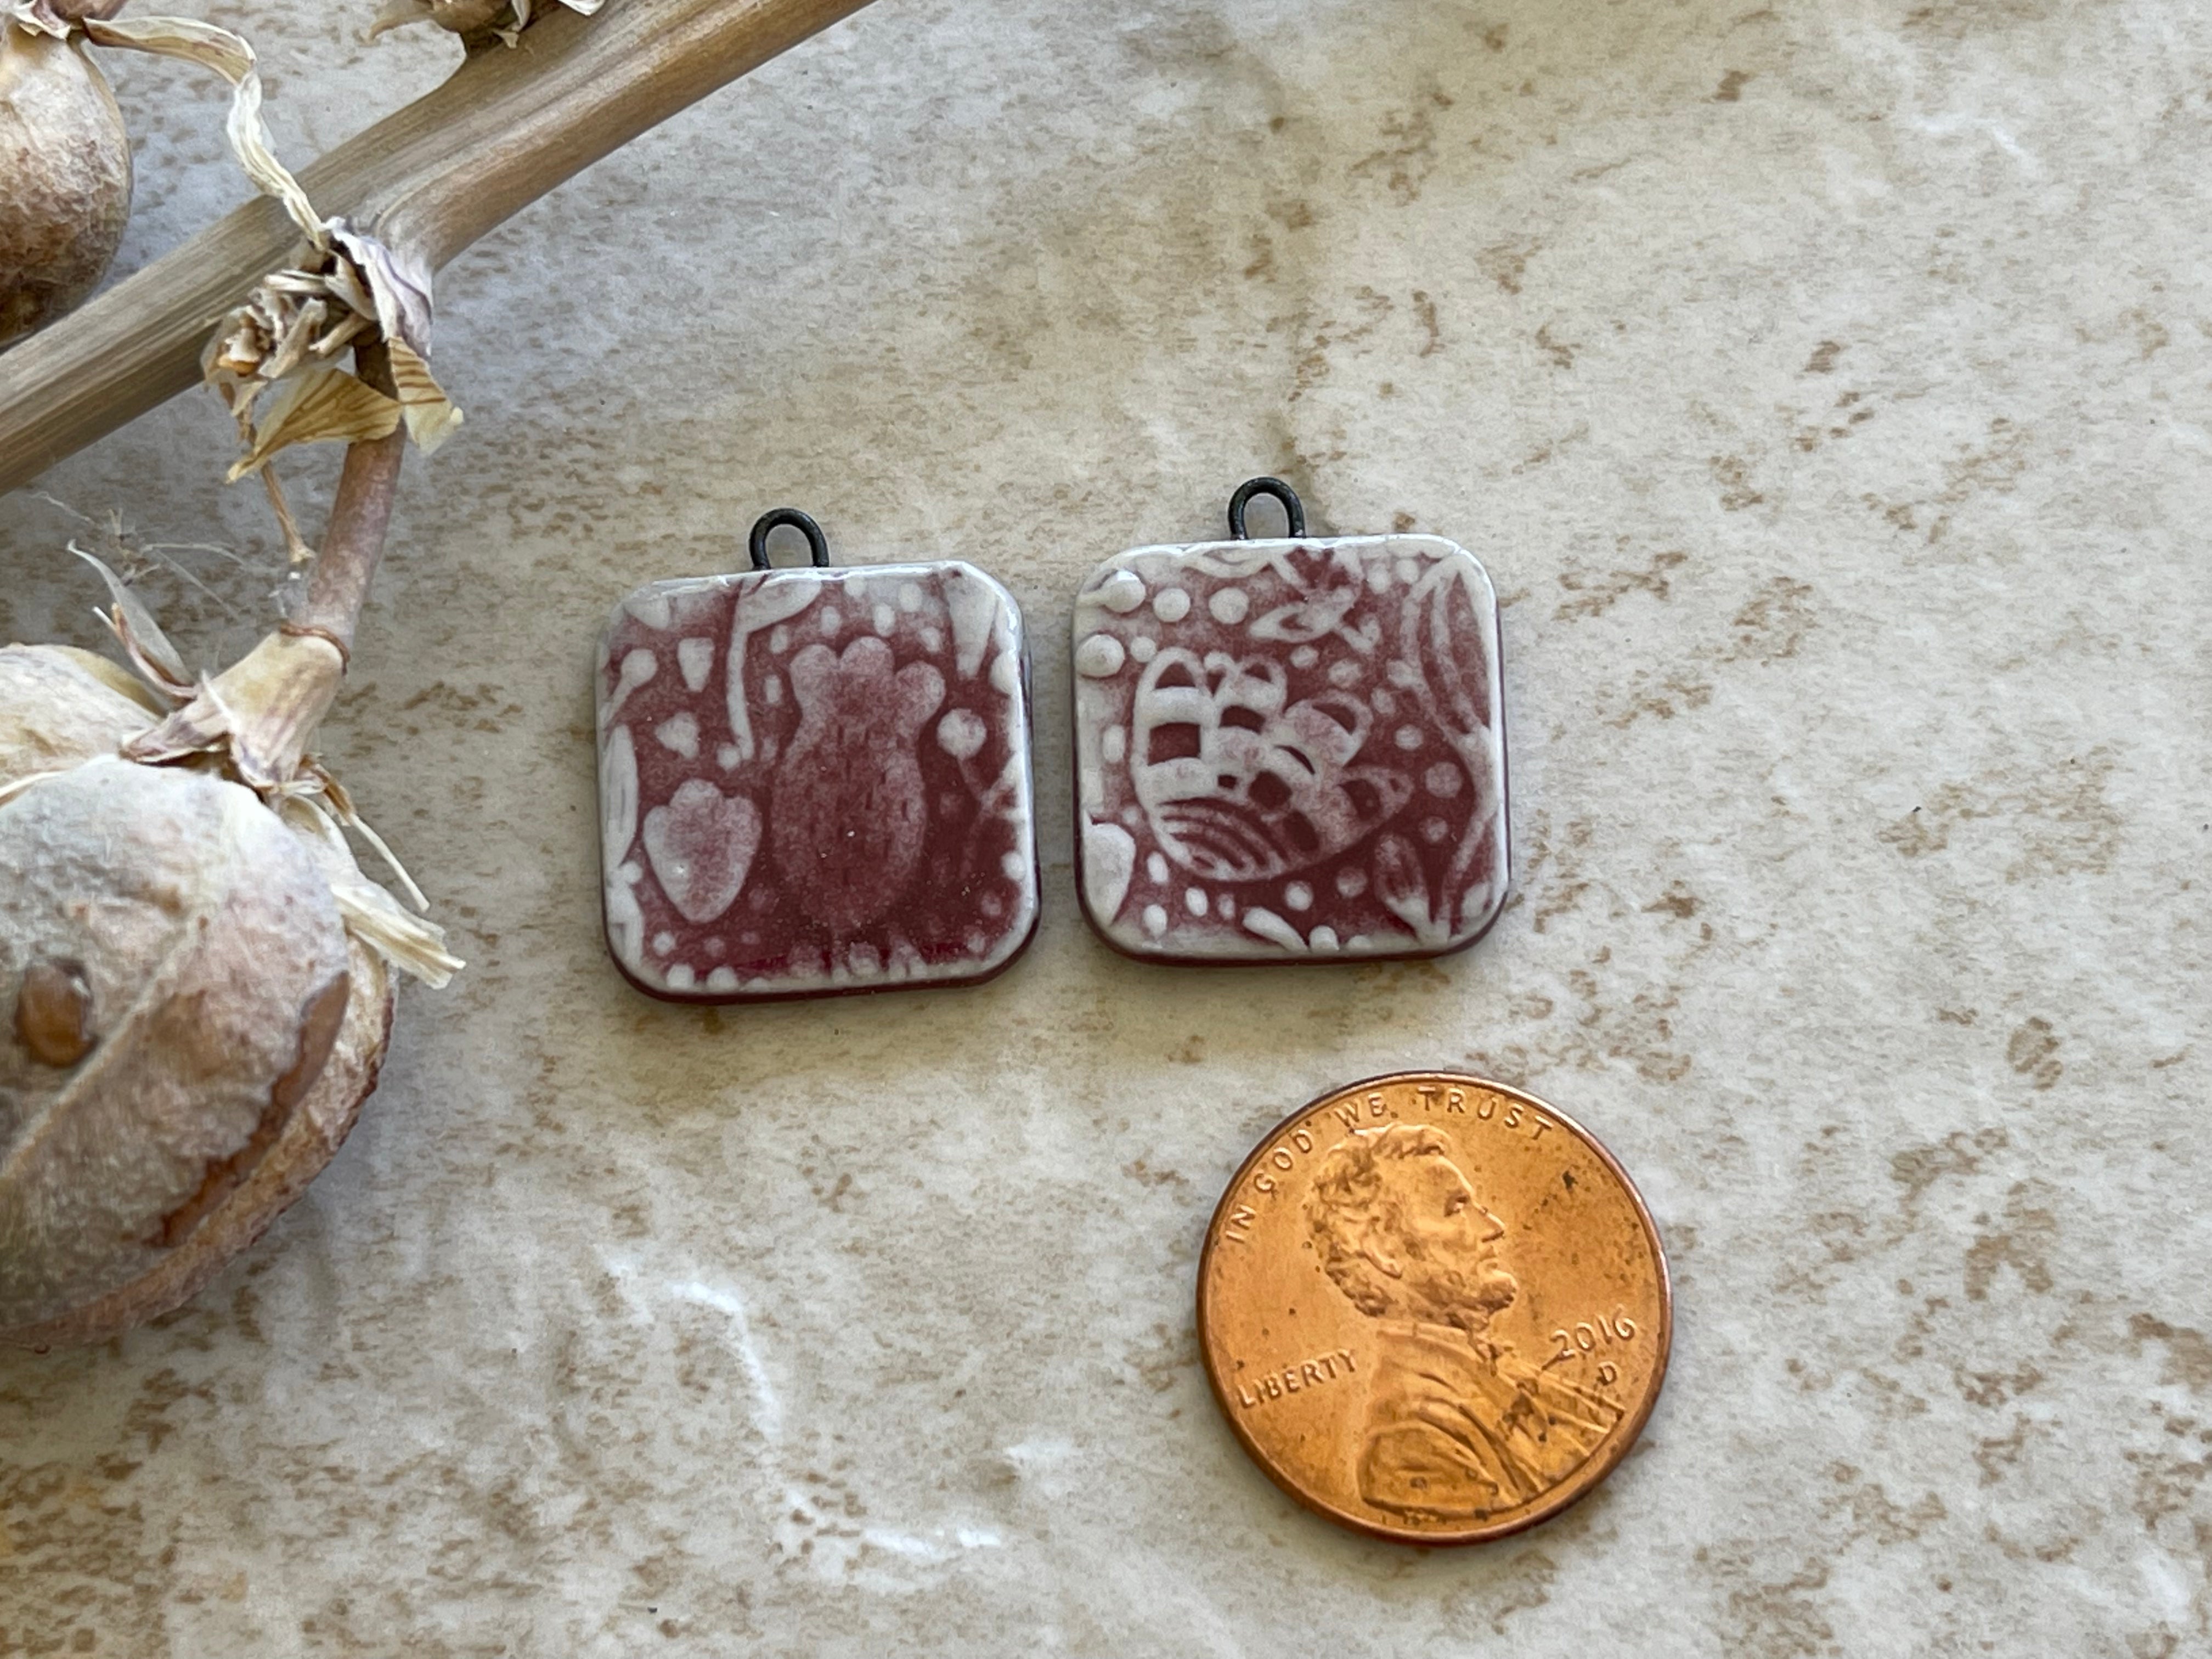 Burgundy Square Floral , Earring Bead Pair, Porcelain Charms, Ceramic Charms, Jewelry Making Components, Beading Handmade, DIY Earrings, DIY Beads